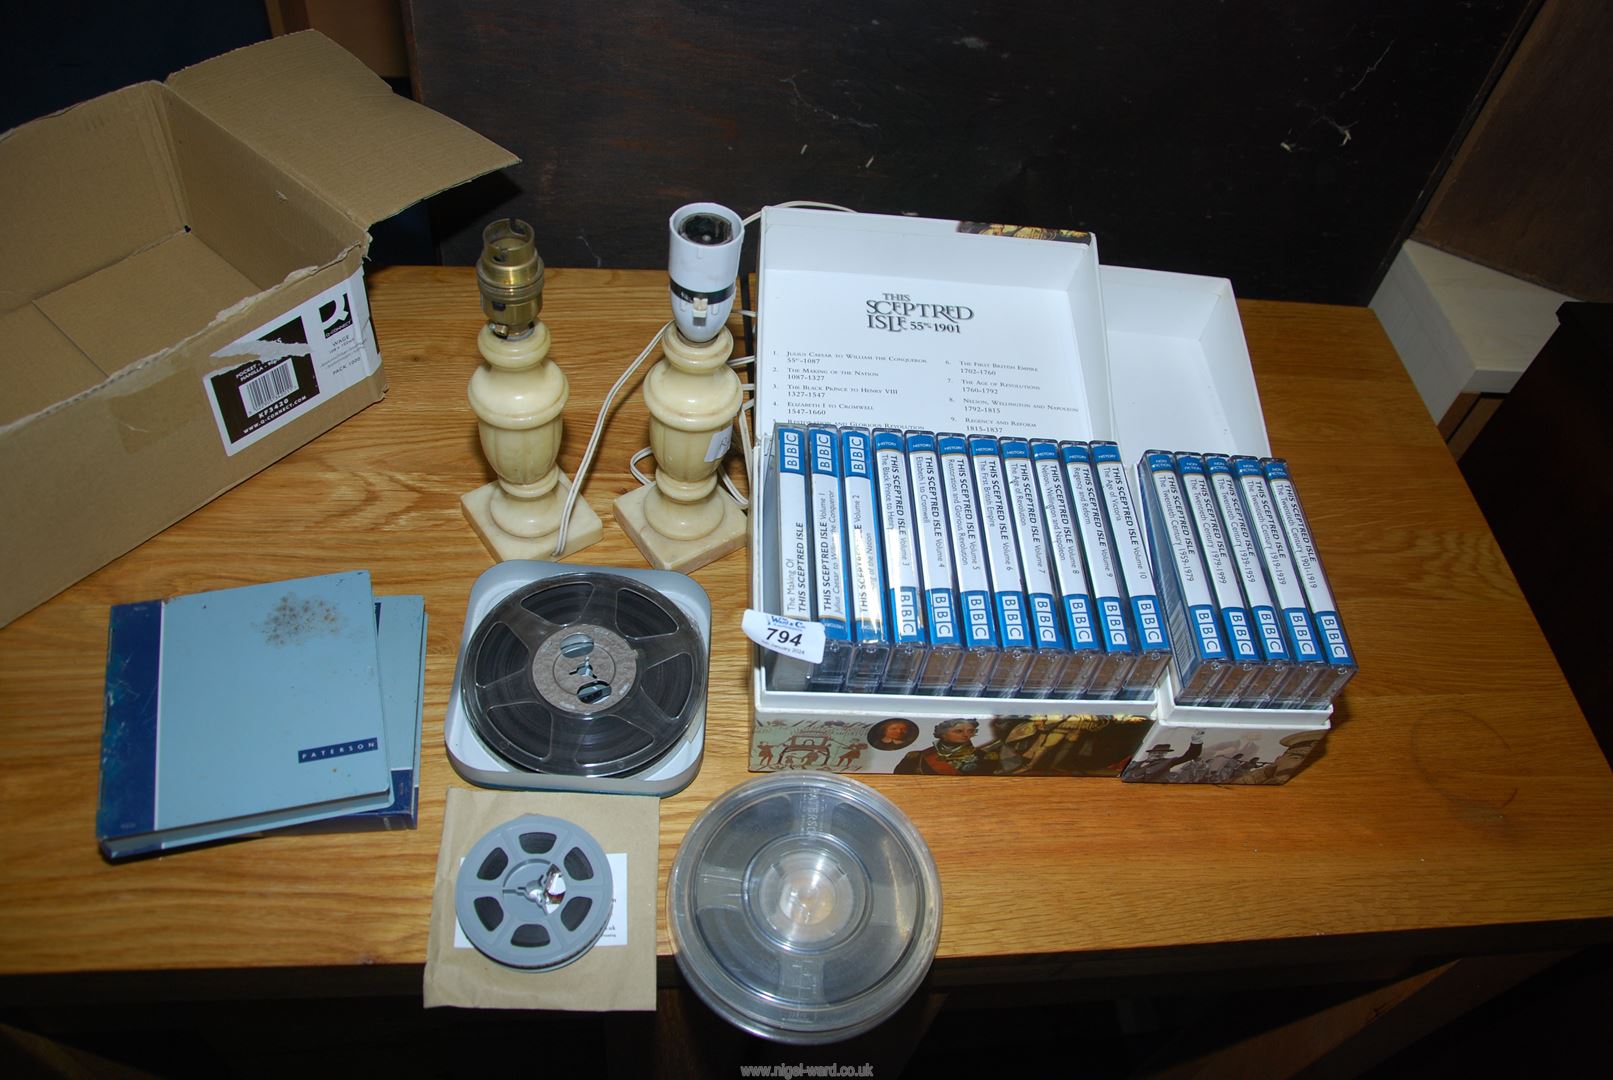 BBC audio tapes including Sceptred Isle, two table lamp bases and a small quantity of cine reels.